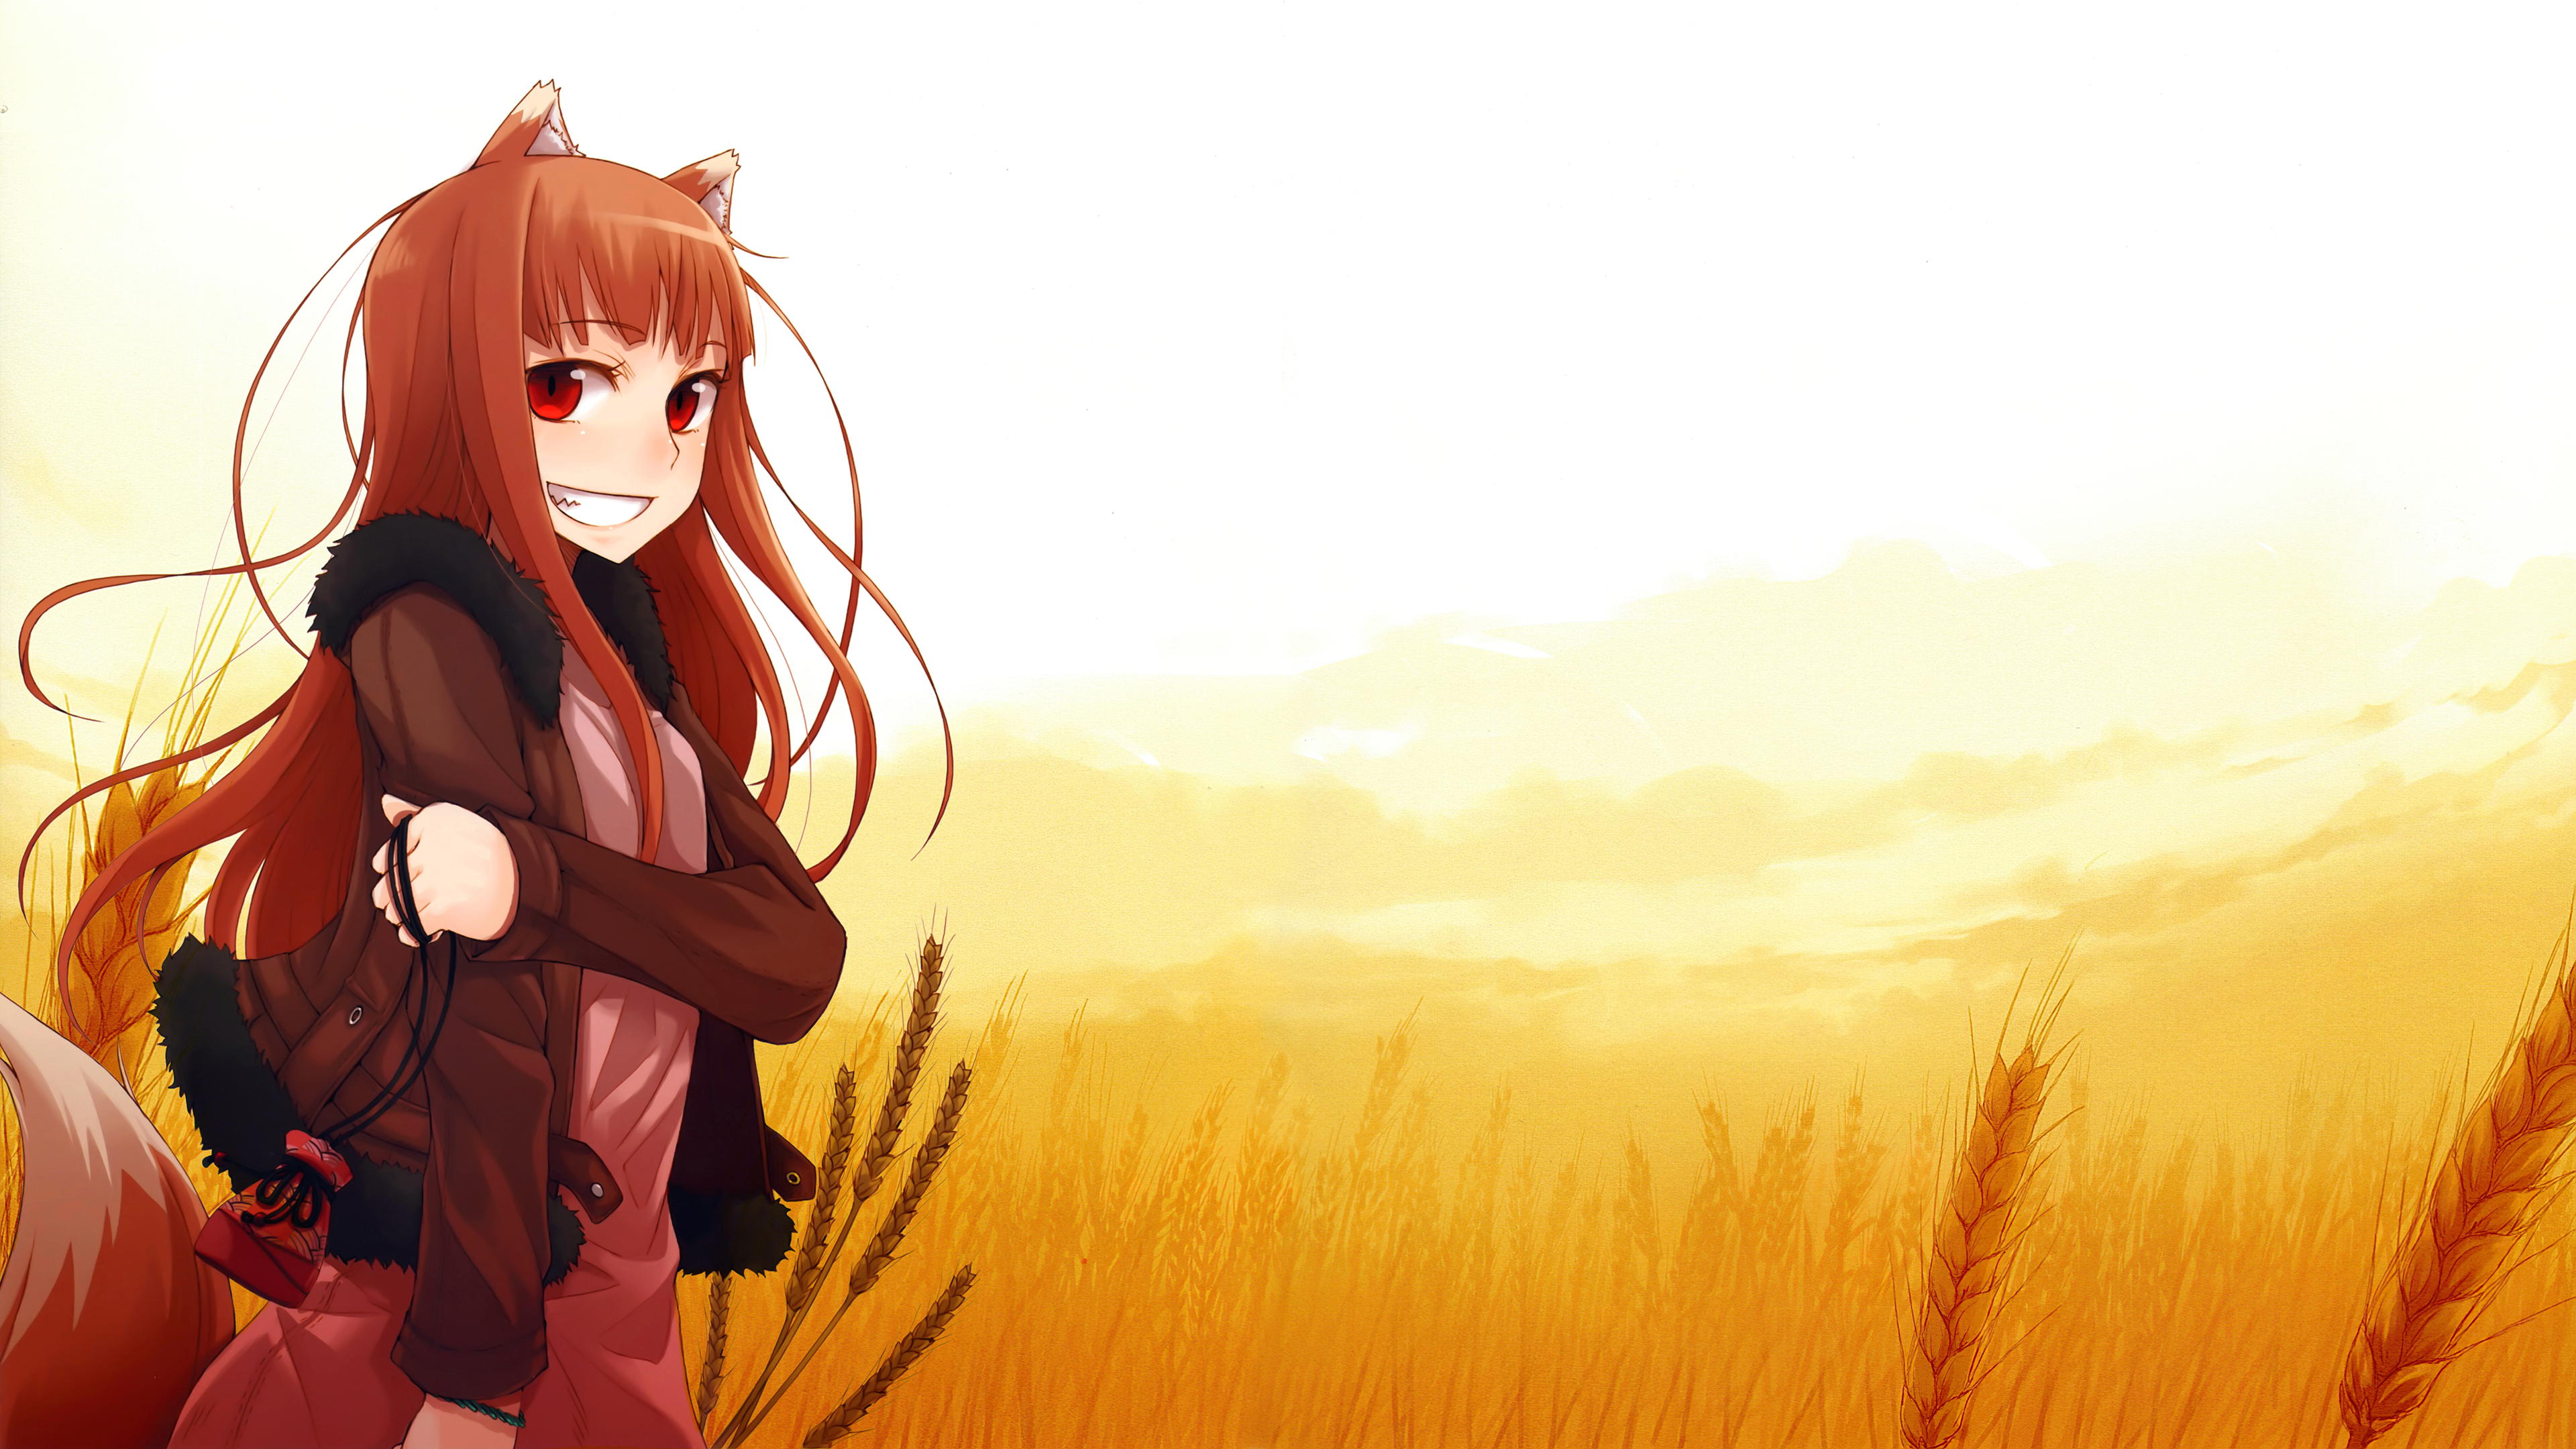 4K wallpaper I made after watching Spice & Wolf, then reading it and falling in love with Holo all over again